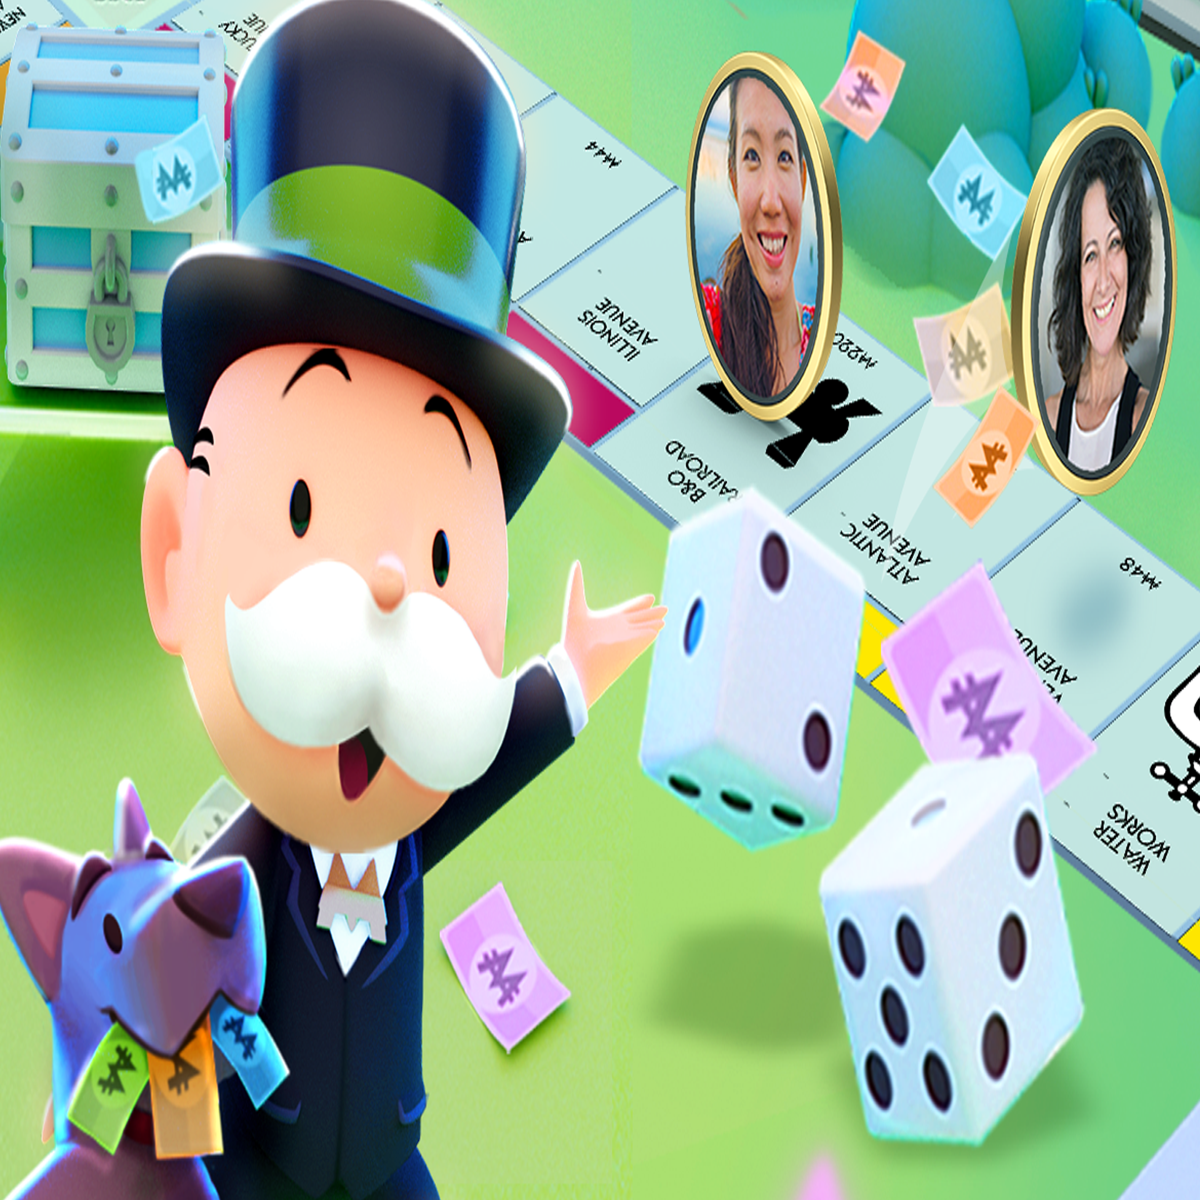 Monopoly - Old Games Download